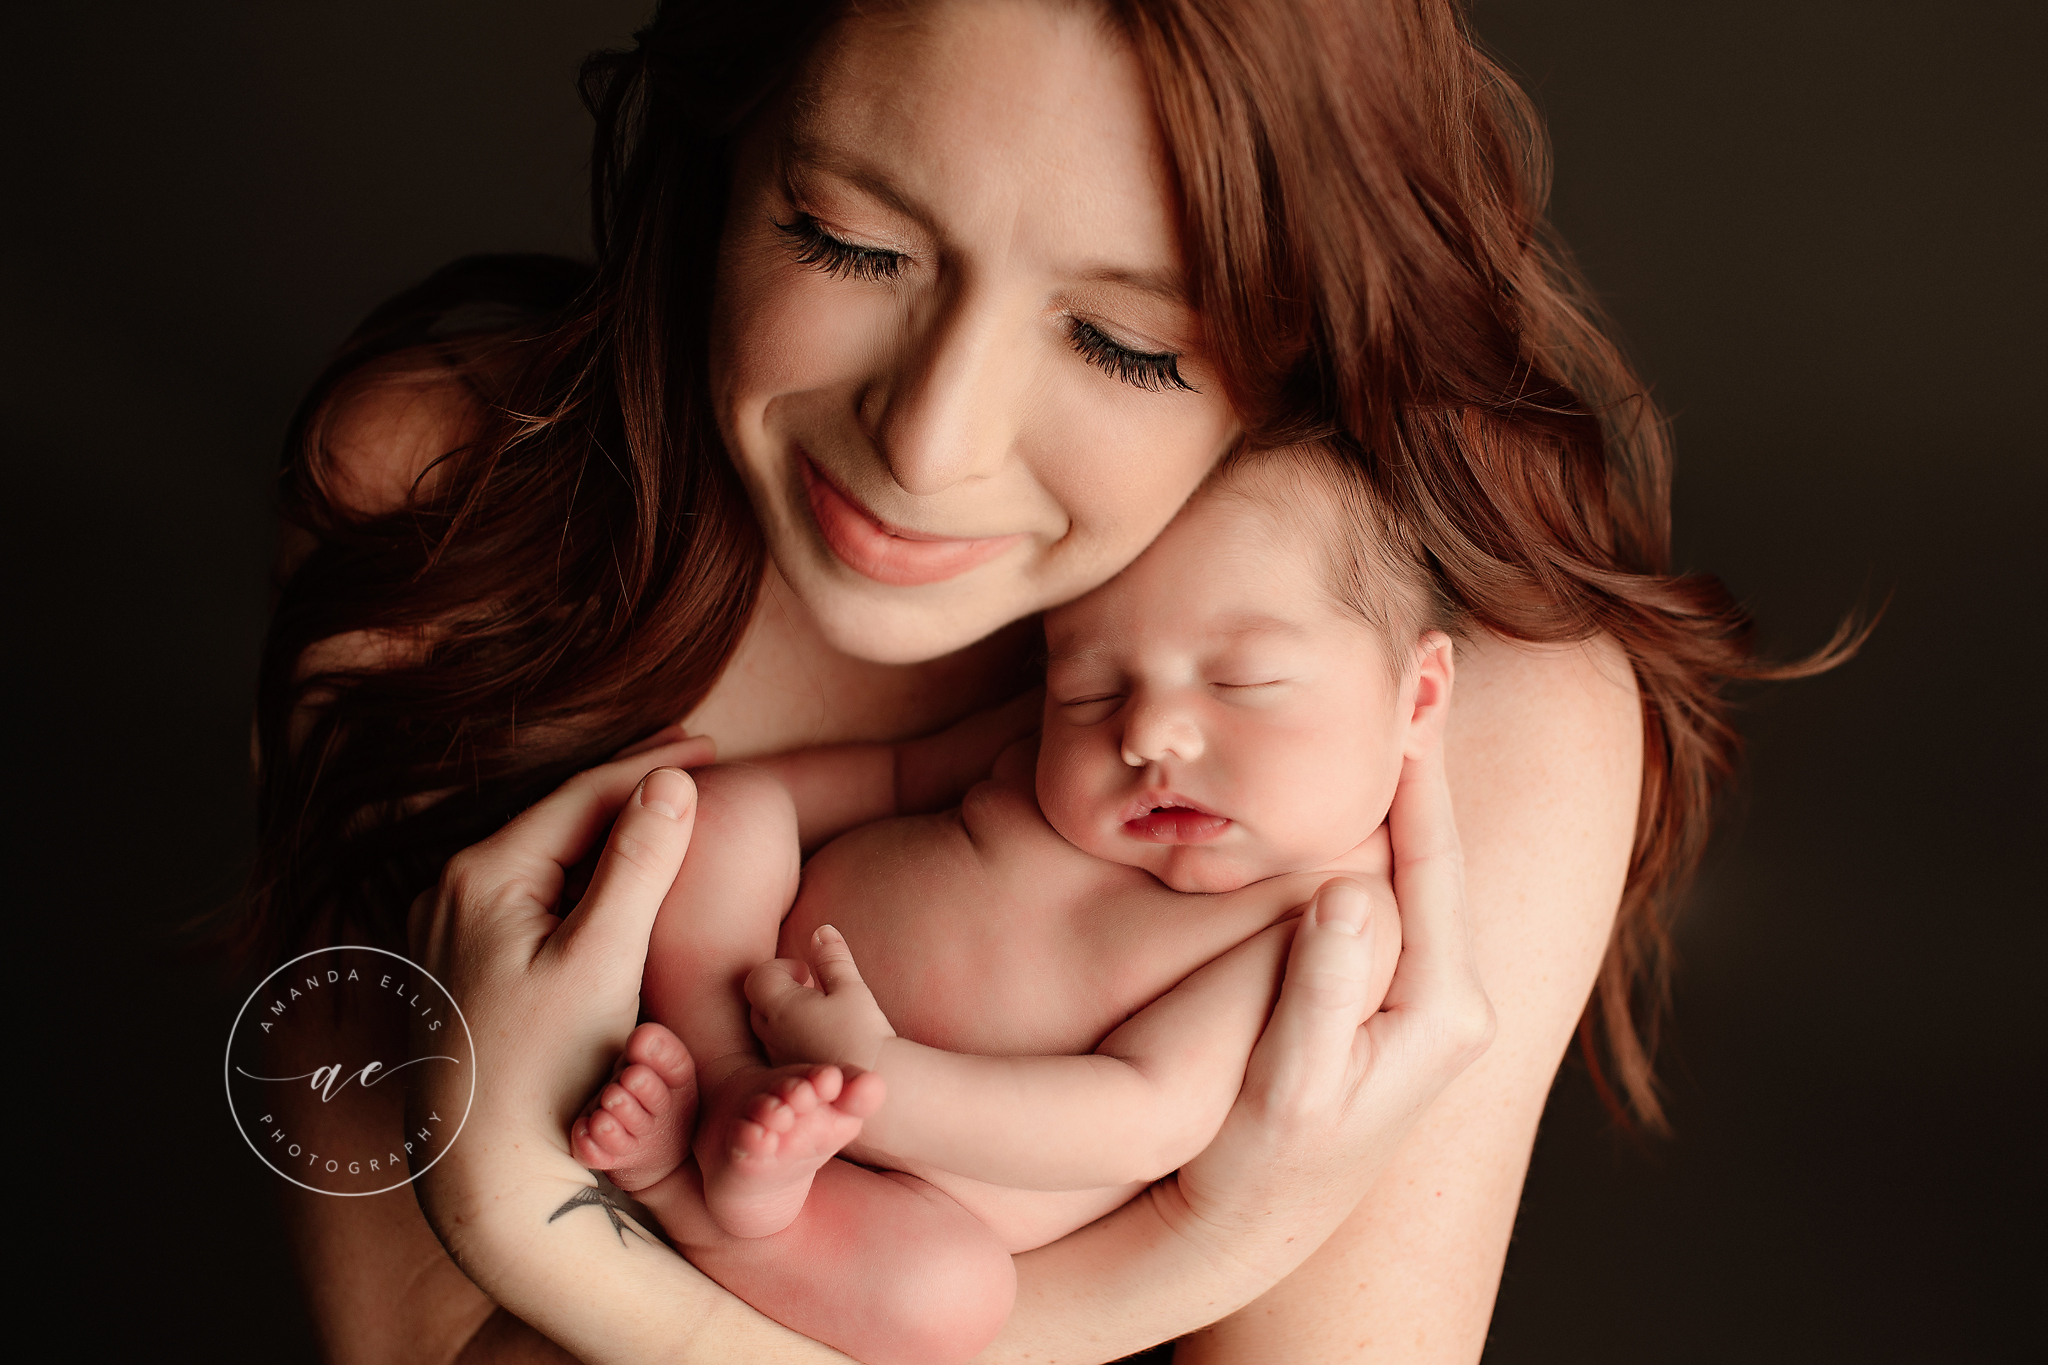 Mother with long red hair smiling sweetly at her new baby